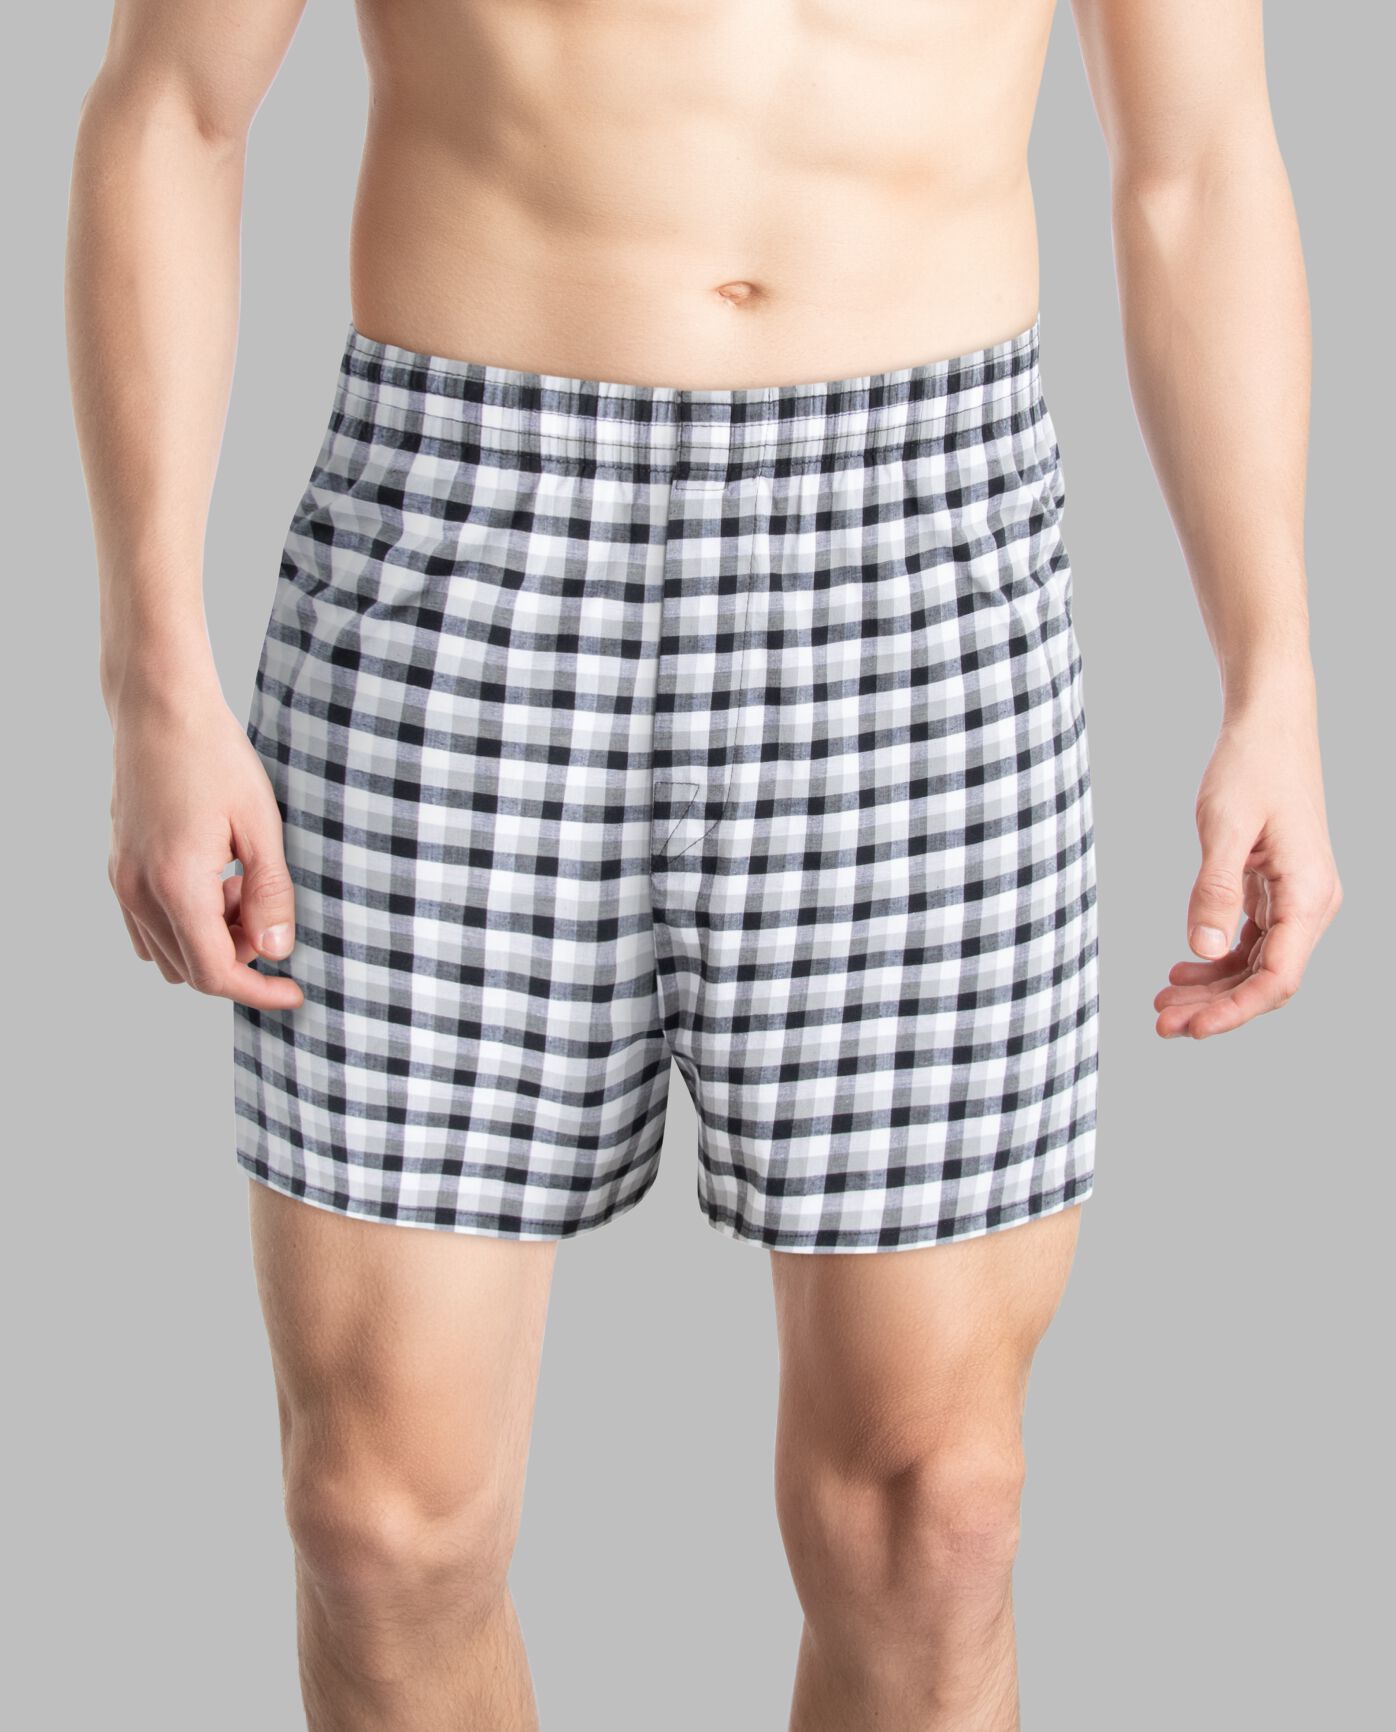 Men's Cotton Stretch Woven Boxer, Assorted 6 Pack